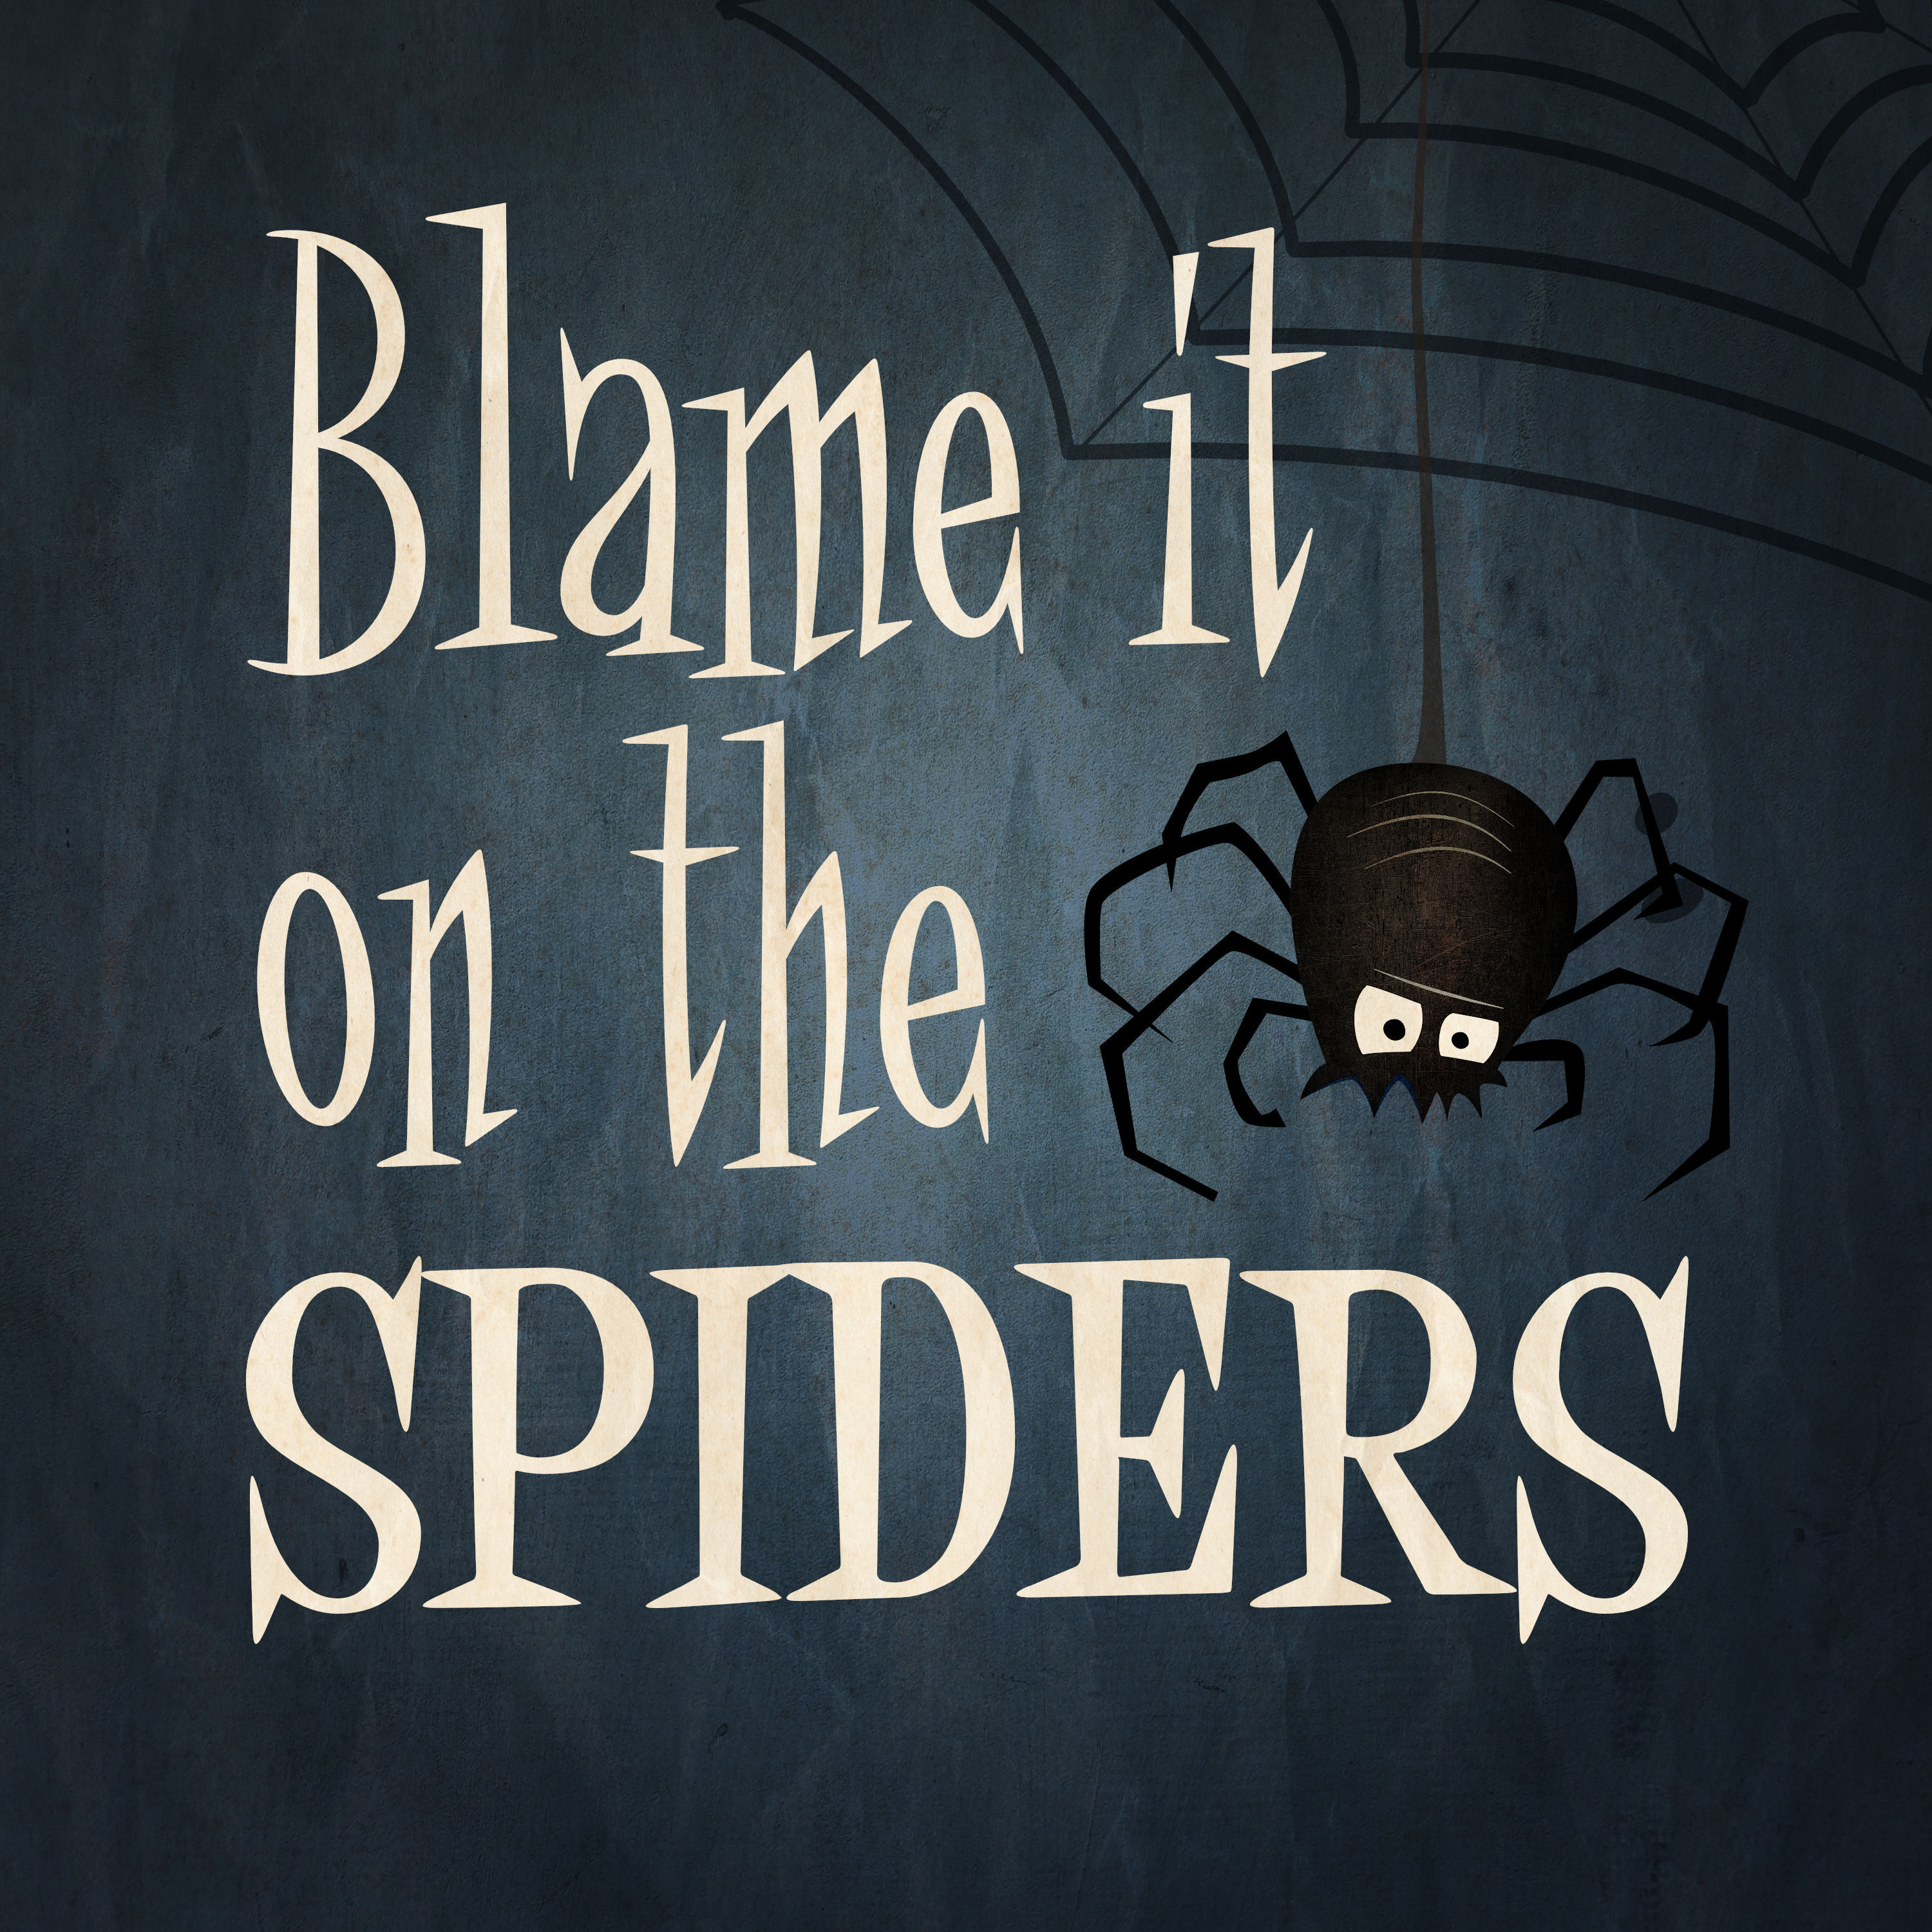 40. Blame it on the spiders